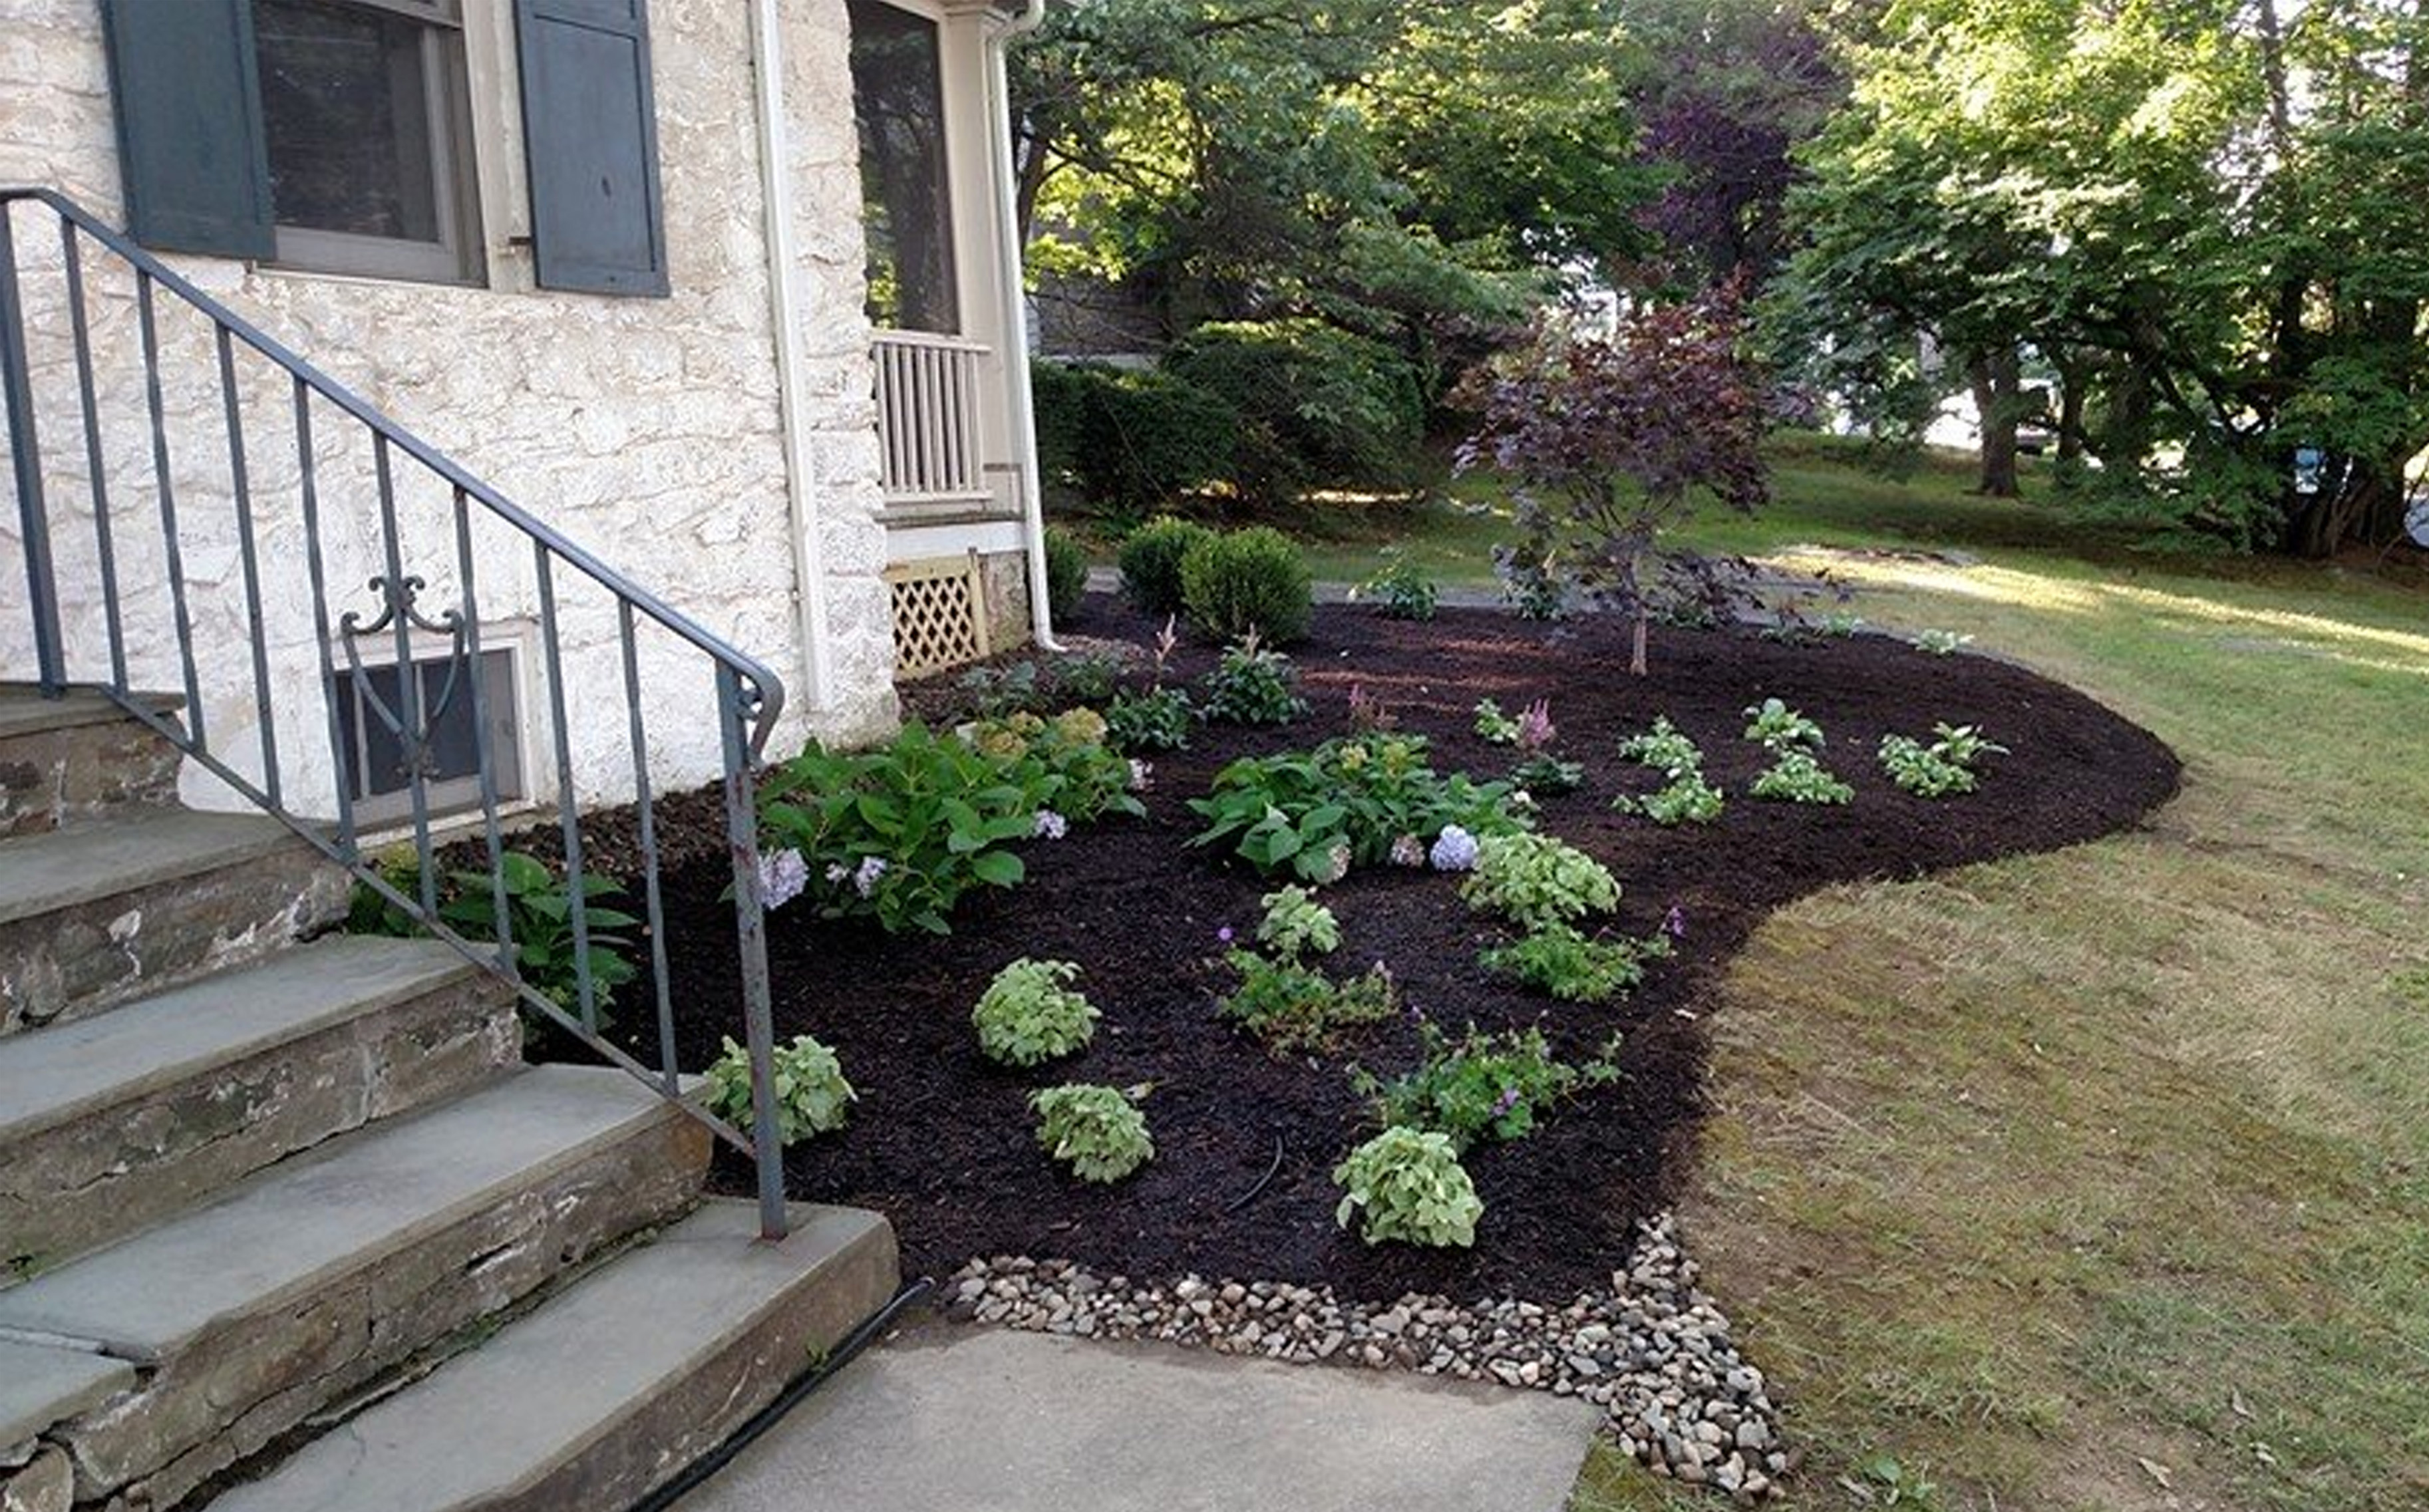 Thumbnail of completed plant bed, on the corner, with mulch and stone